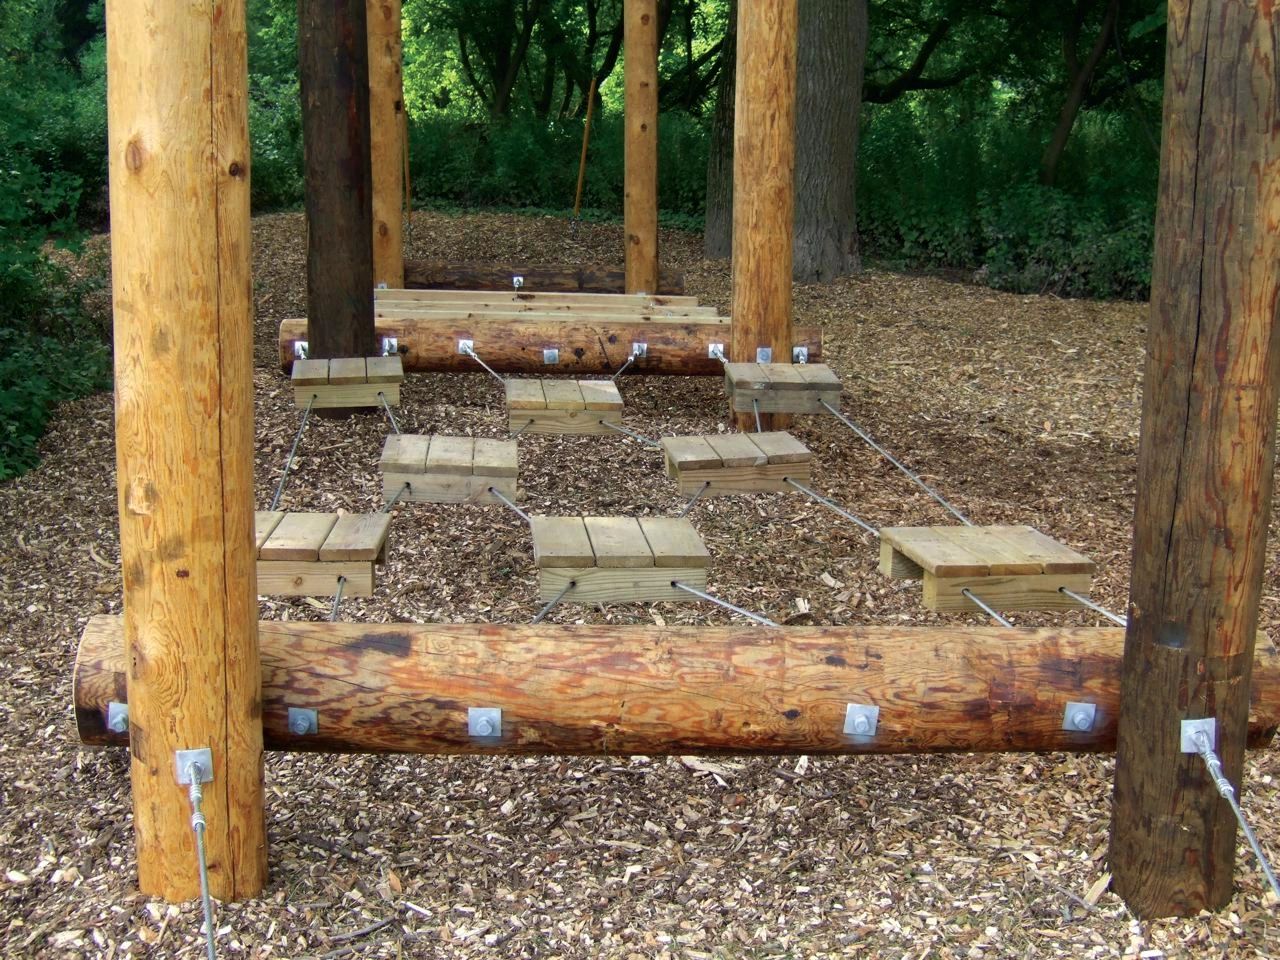 Low Ropes Course Elements and Activities from summer camp in Michigan.